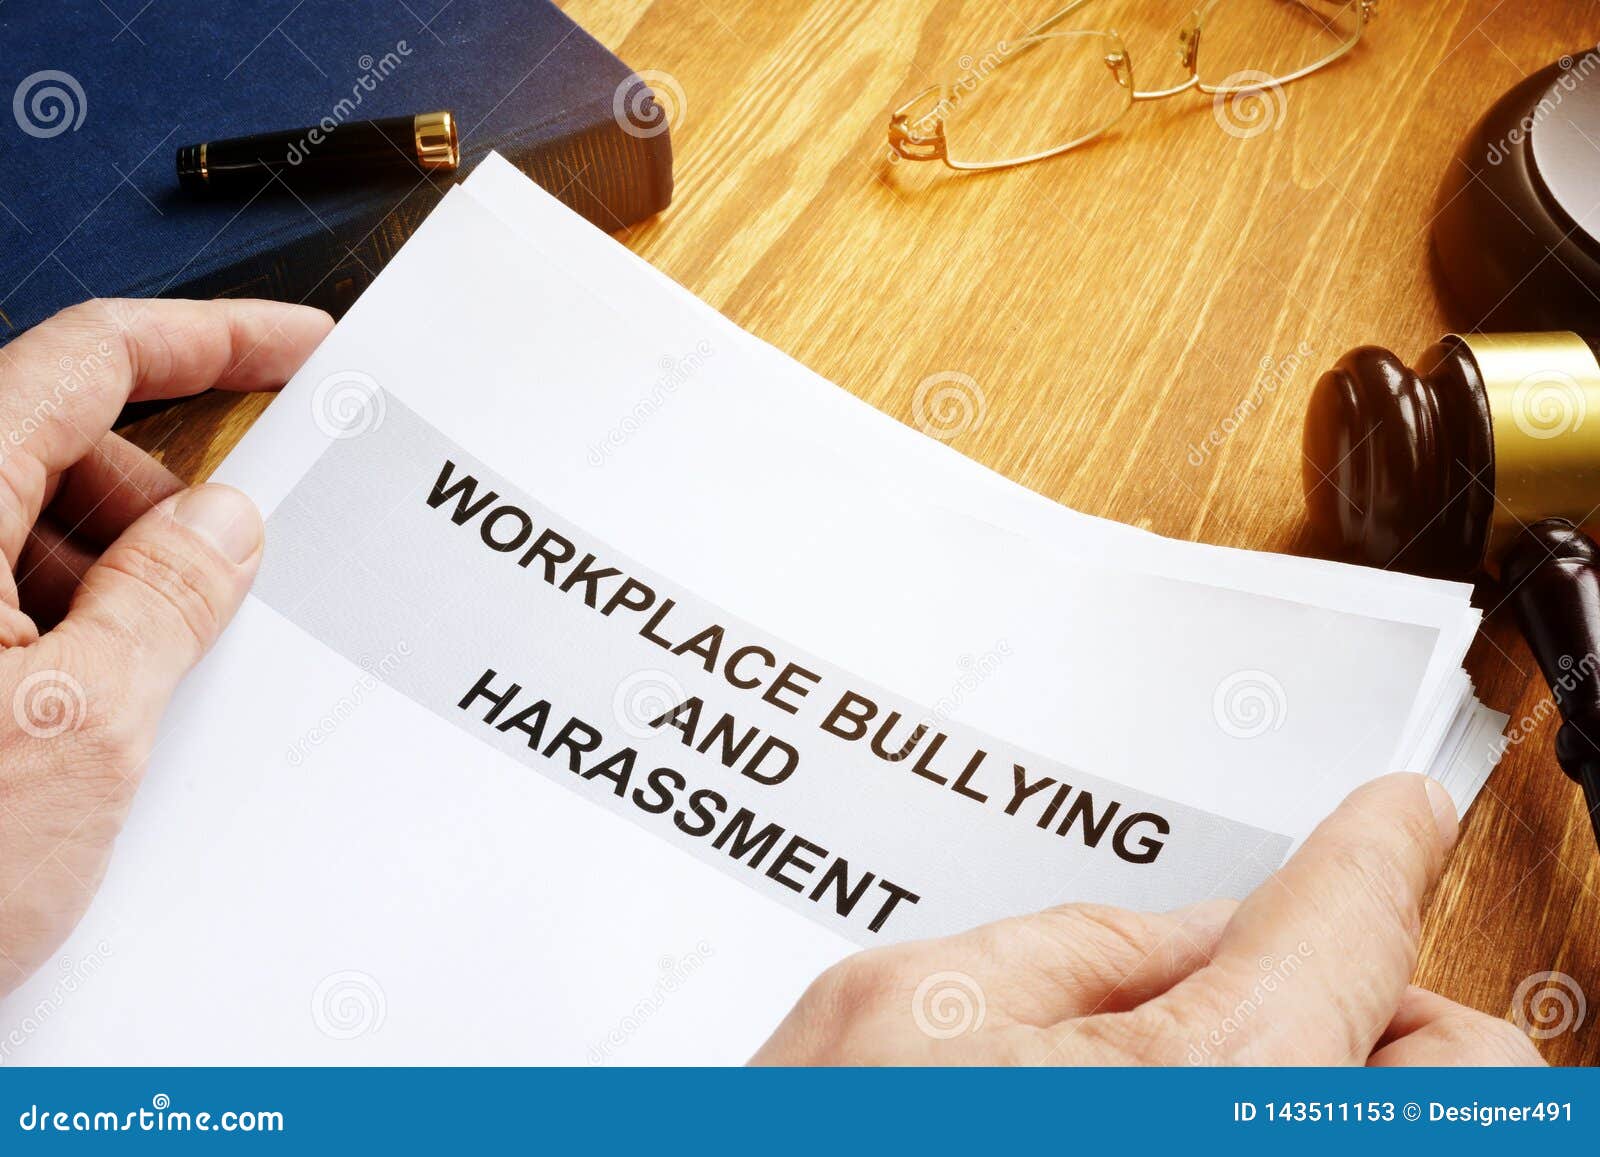 workplace bullying and harassment claim